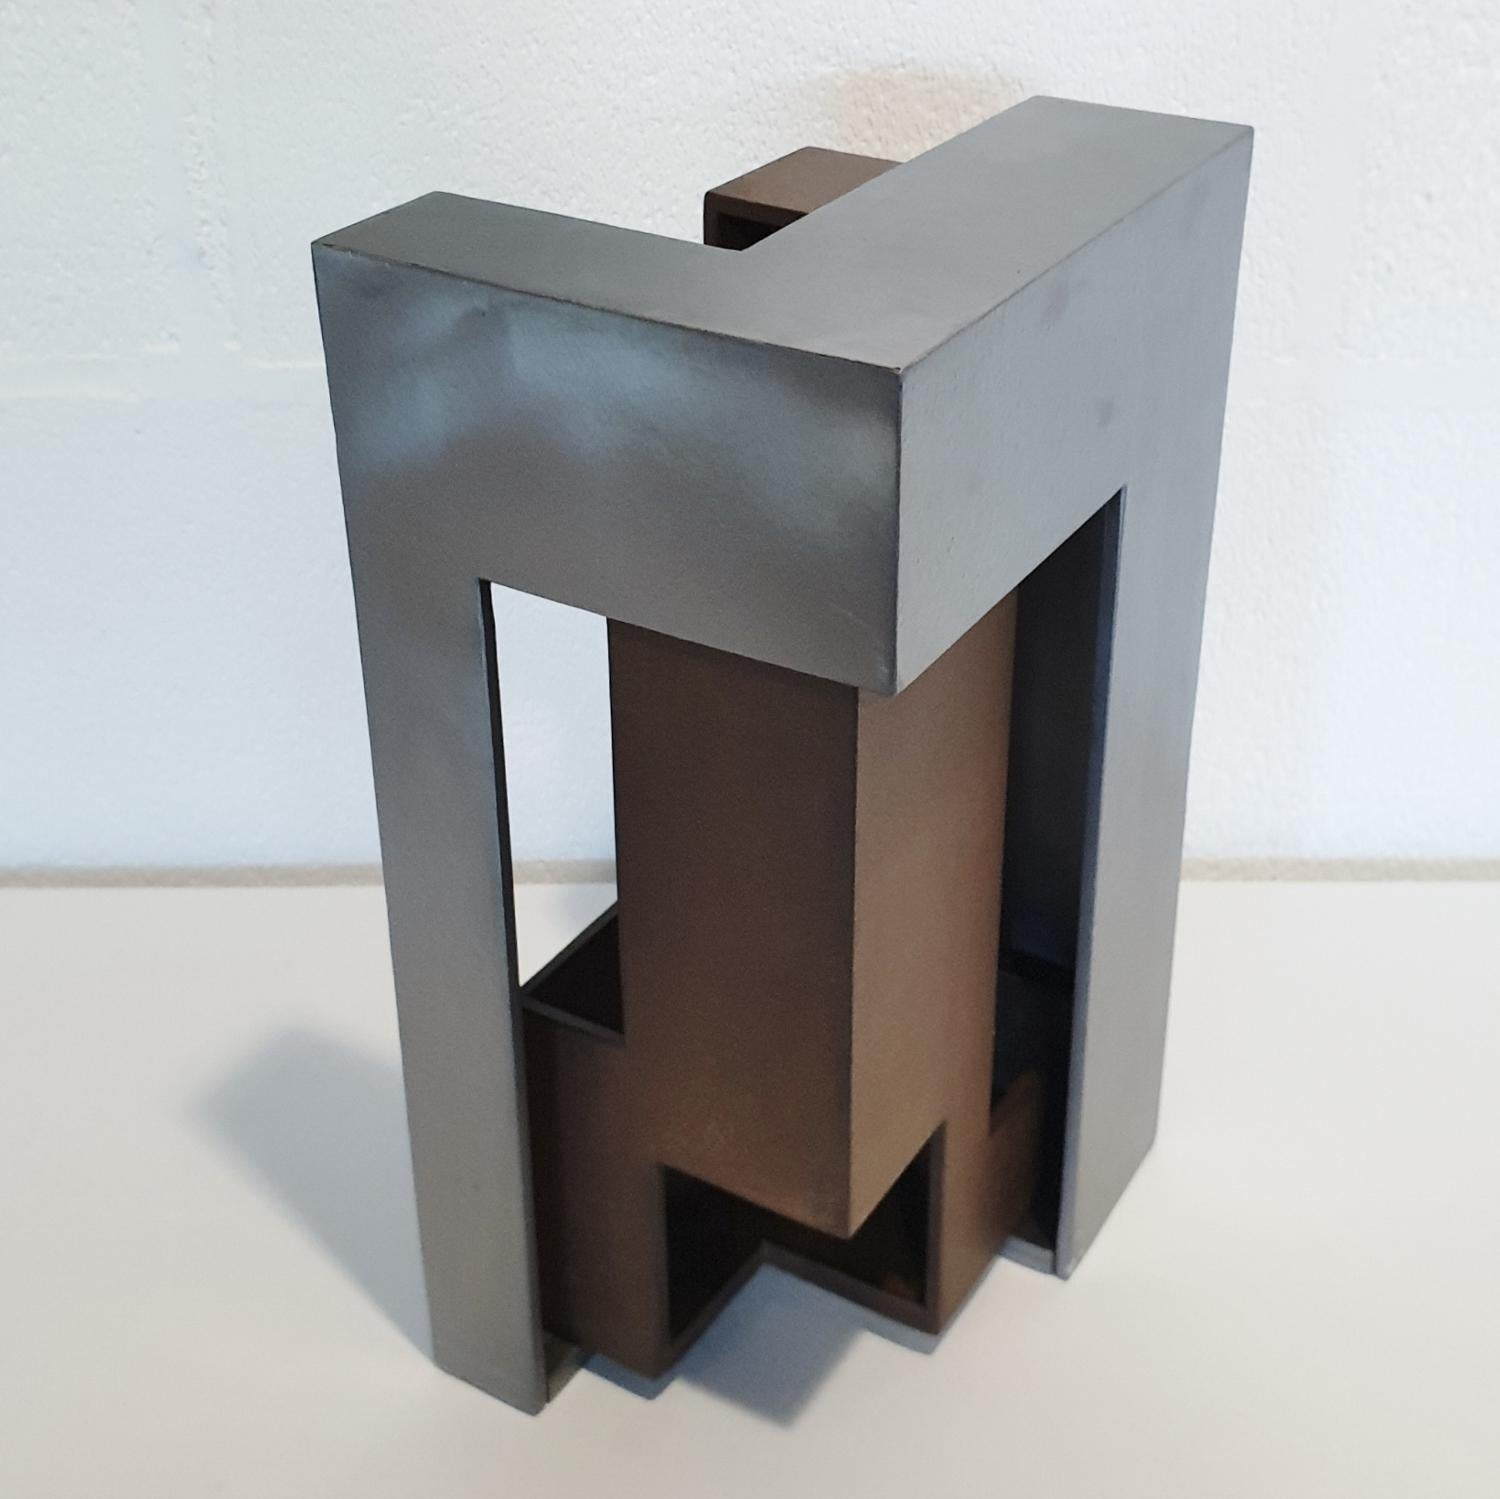 Pareja 05 - contemporary modern abstract geometric steel sculpture - Gray Abstract Sculpture by Eduardo Lacoma